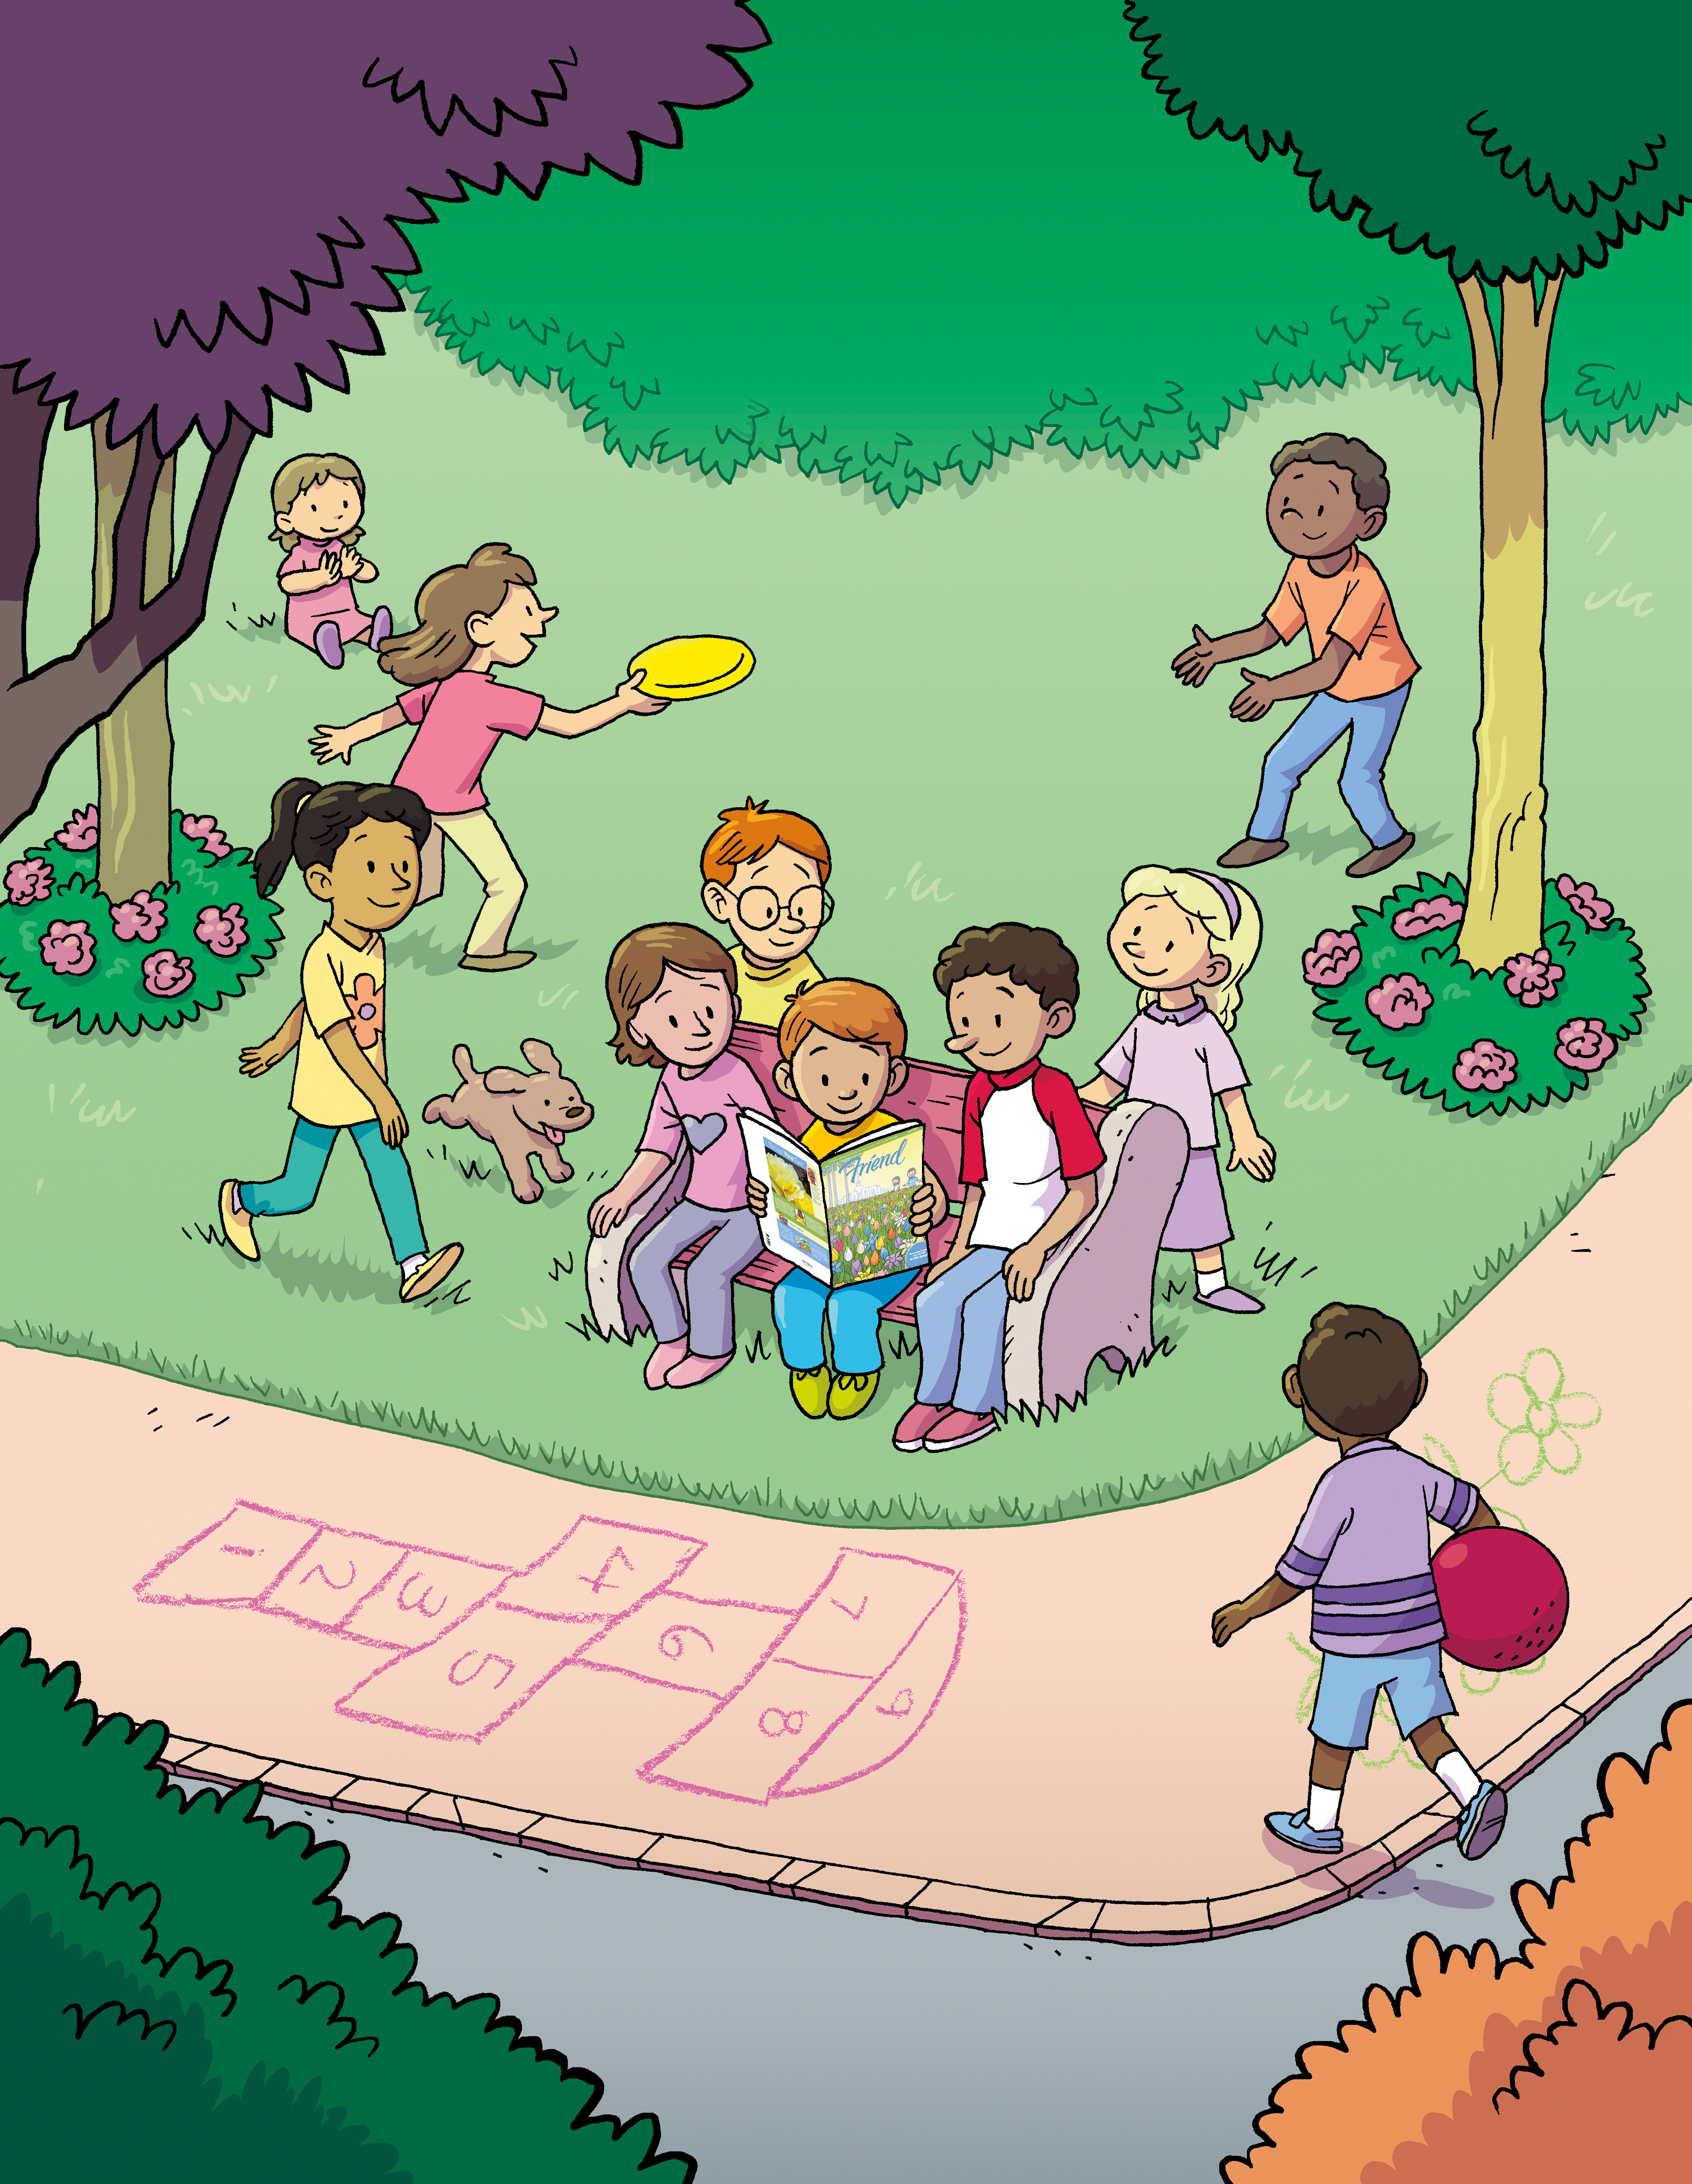 An illustration of a group of children sitting on a bench at a park, reading the Friend magazine while other children around them play with a Frisbee and a ball.